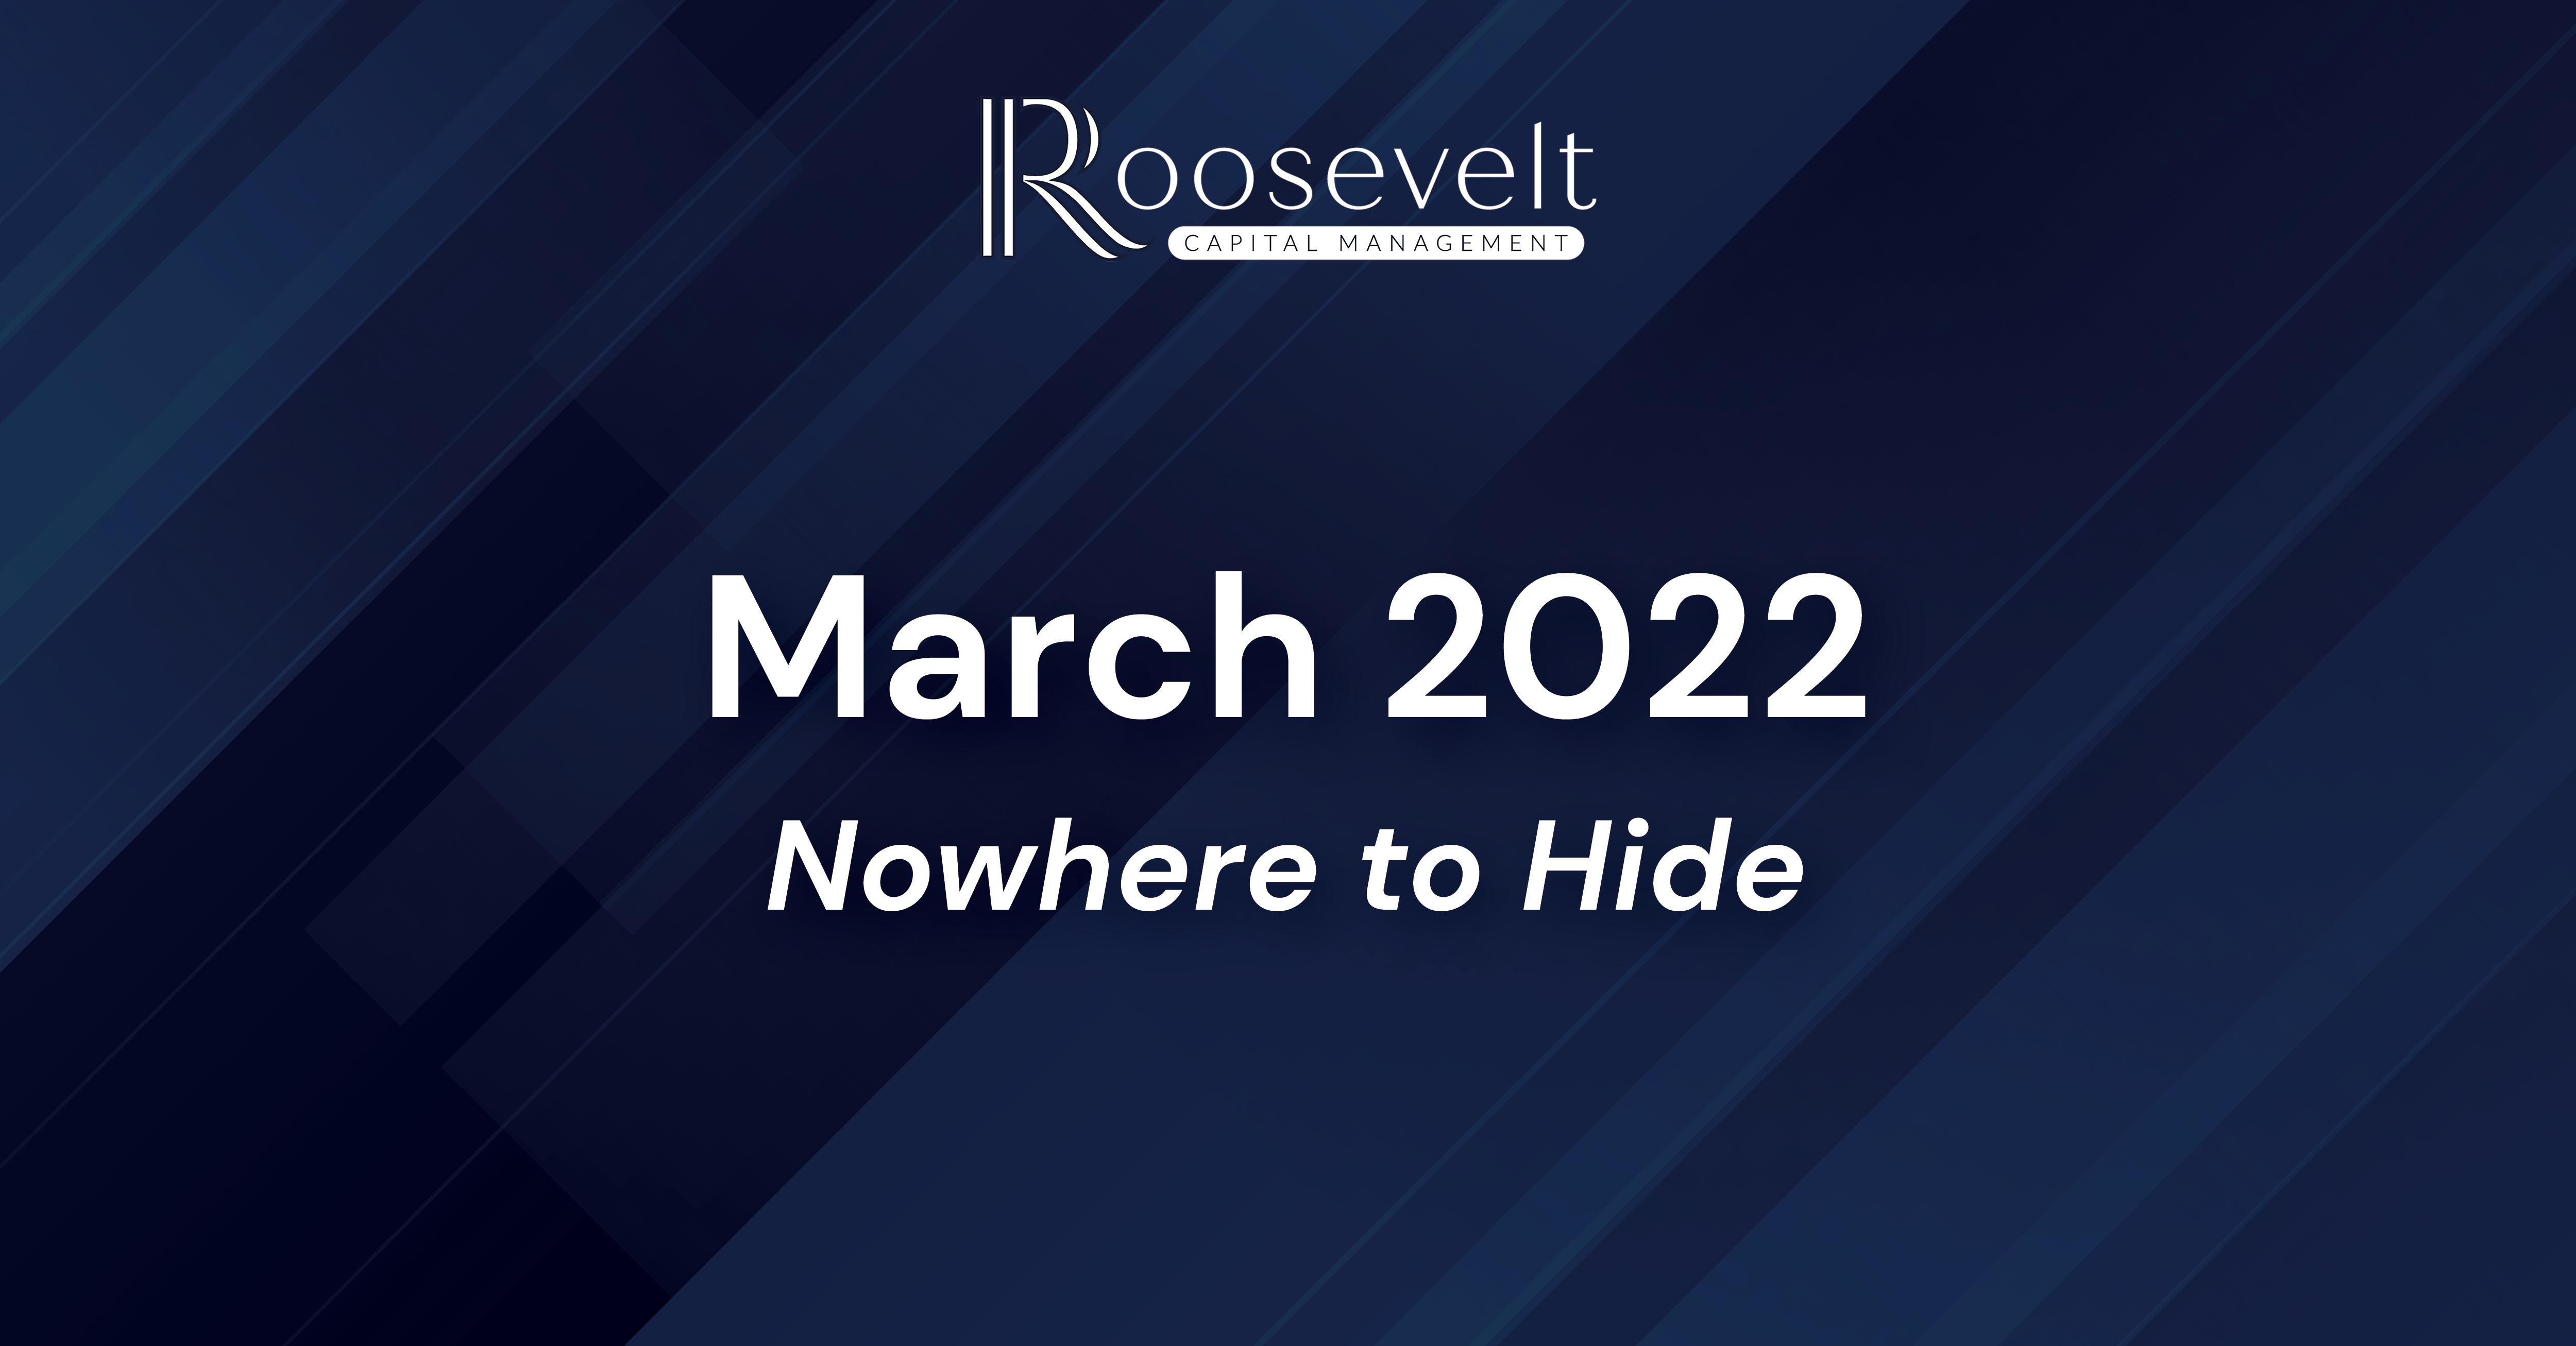 March 2022 - Nowhere to Hide